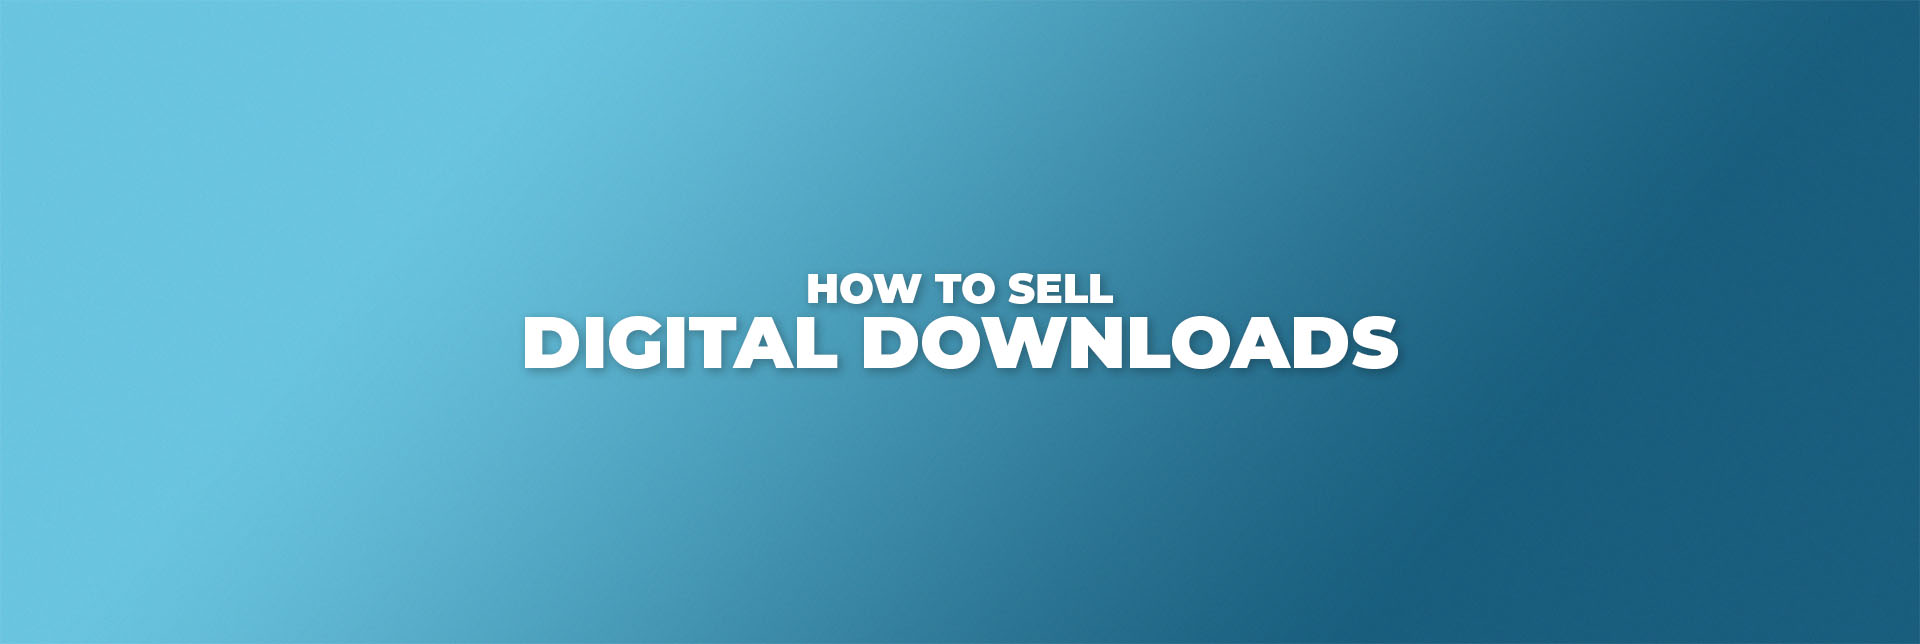 how-to-sell-digital-downloads